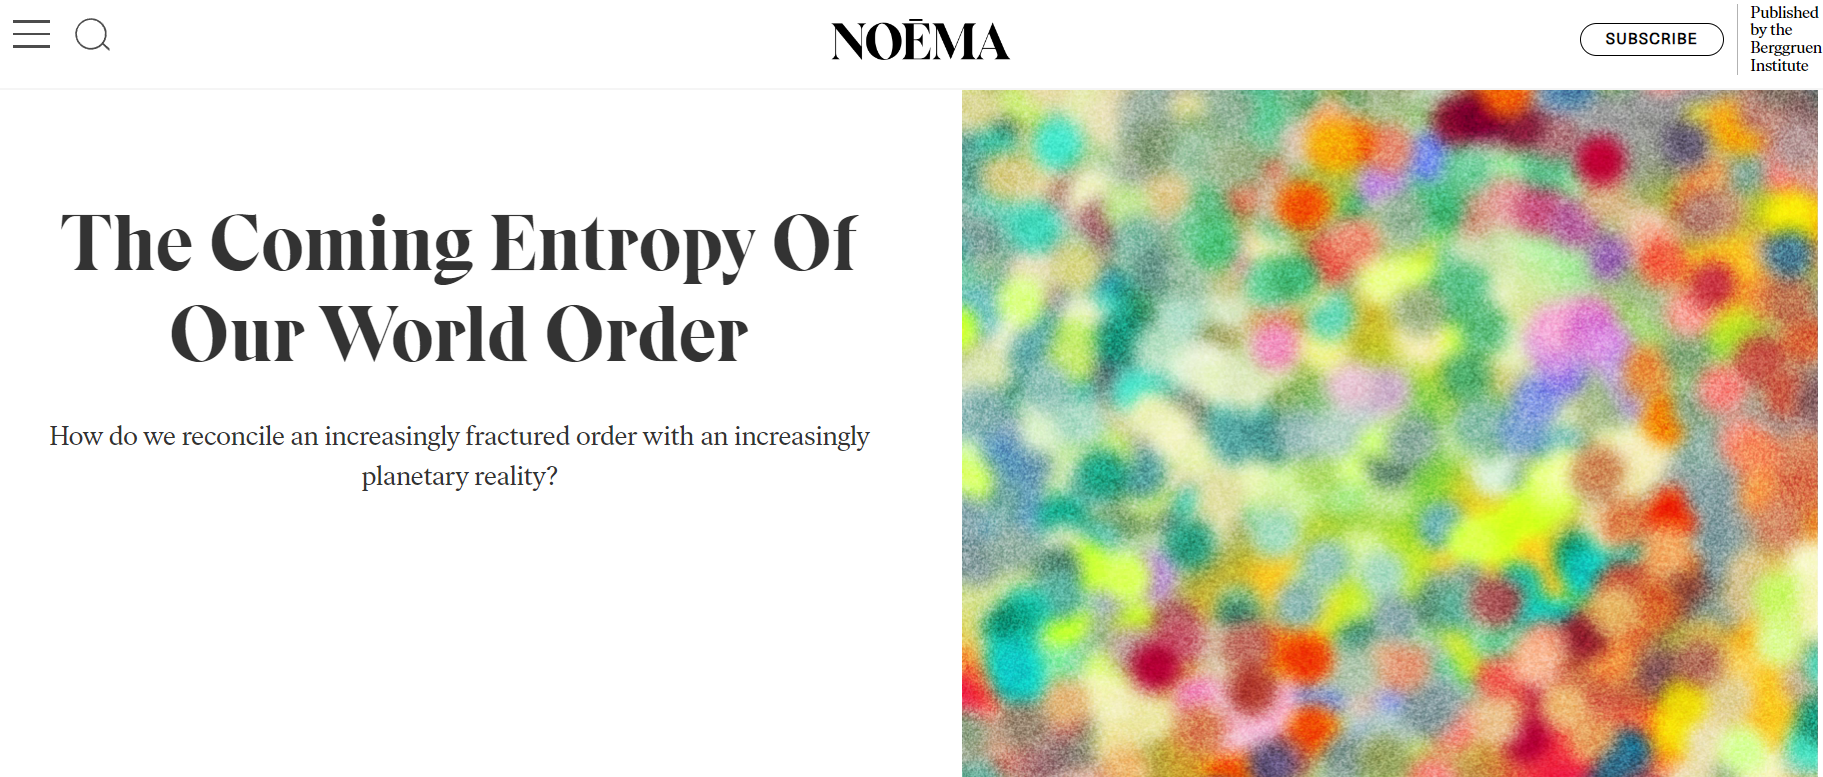 The Coming Entropy Of Our World Order